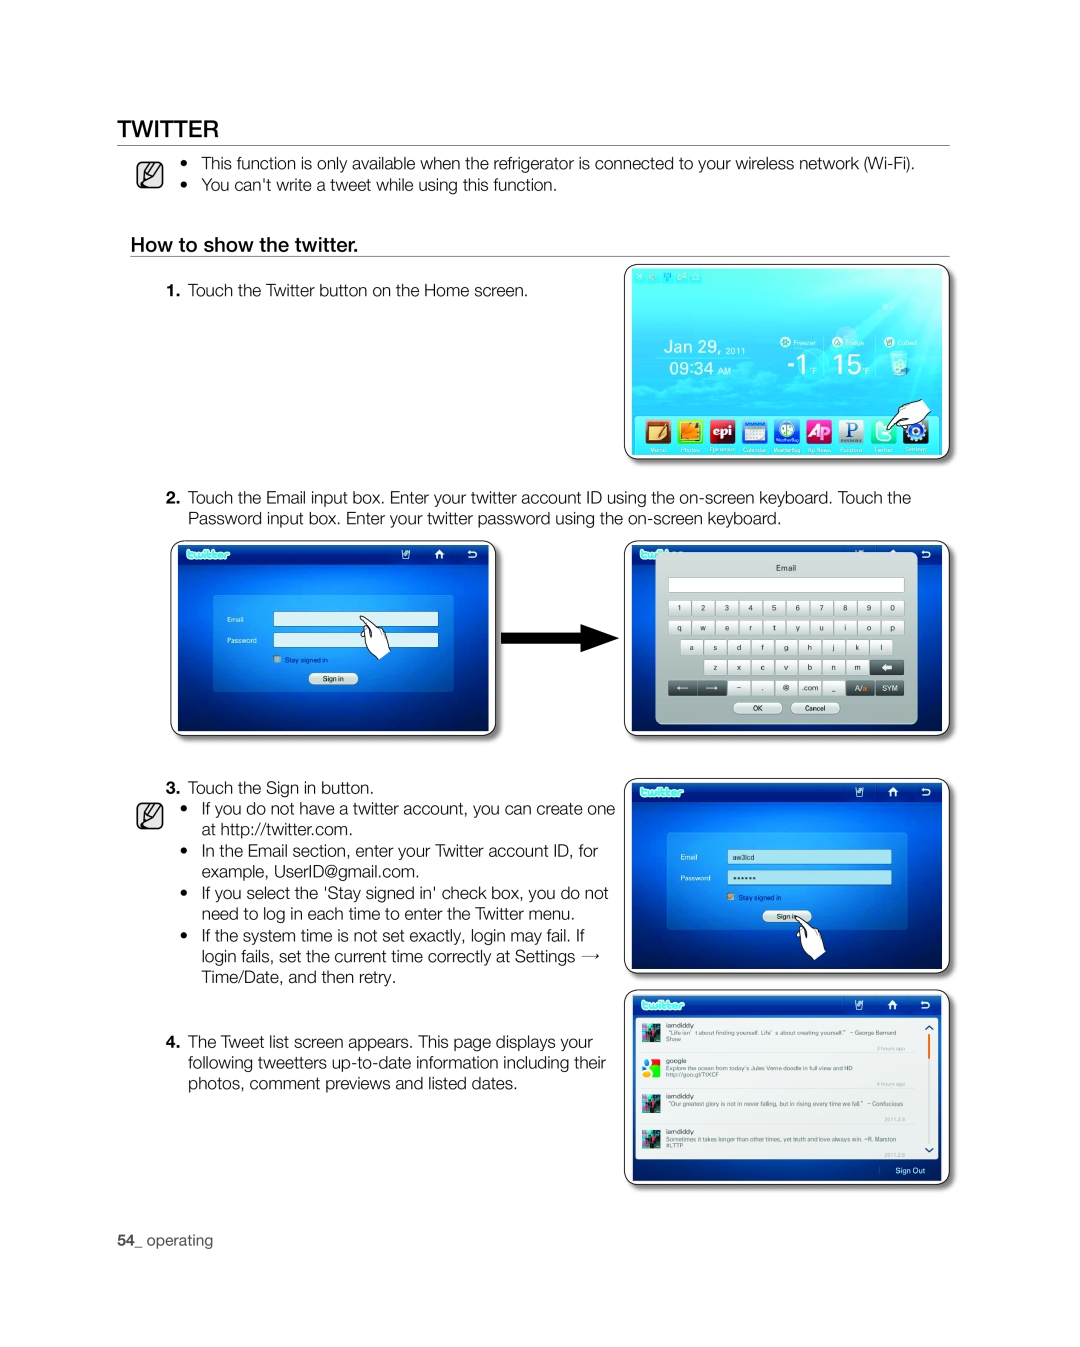 Samsung RSG309** user manual Twitter, How to show the twitter 